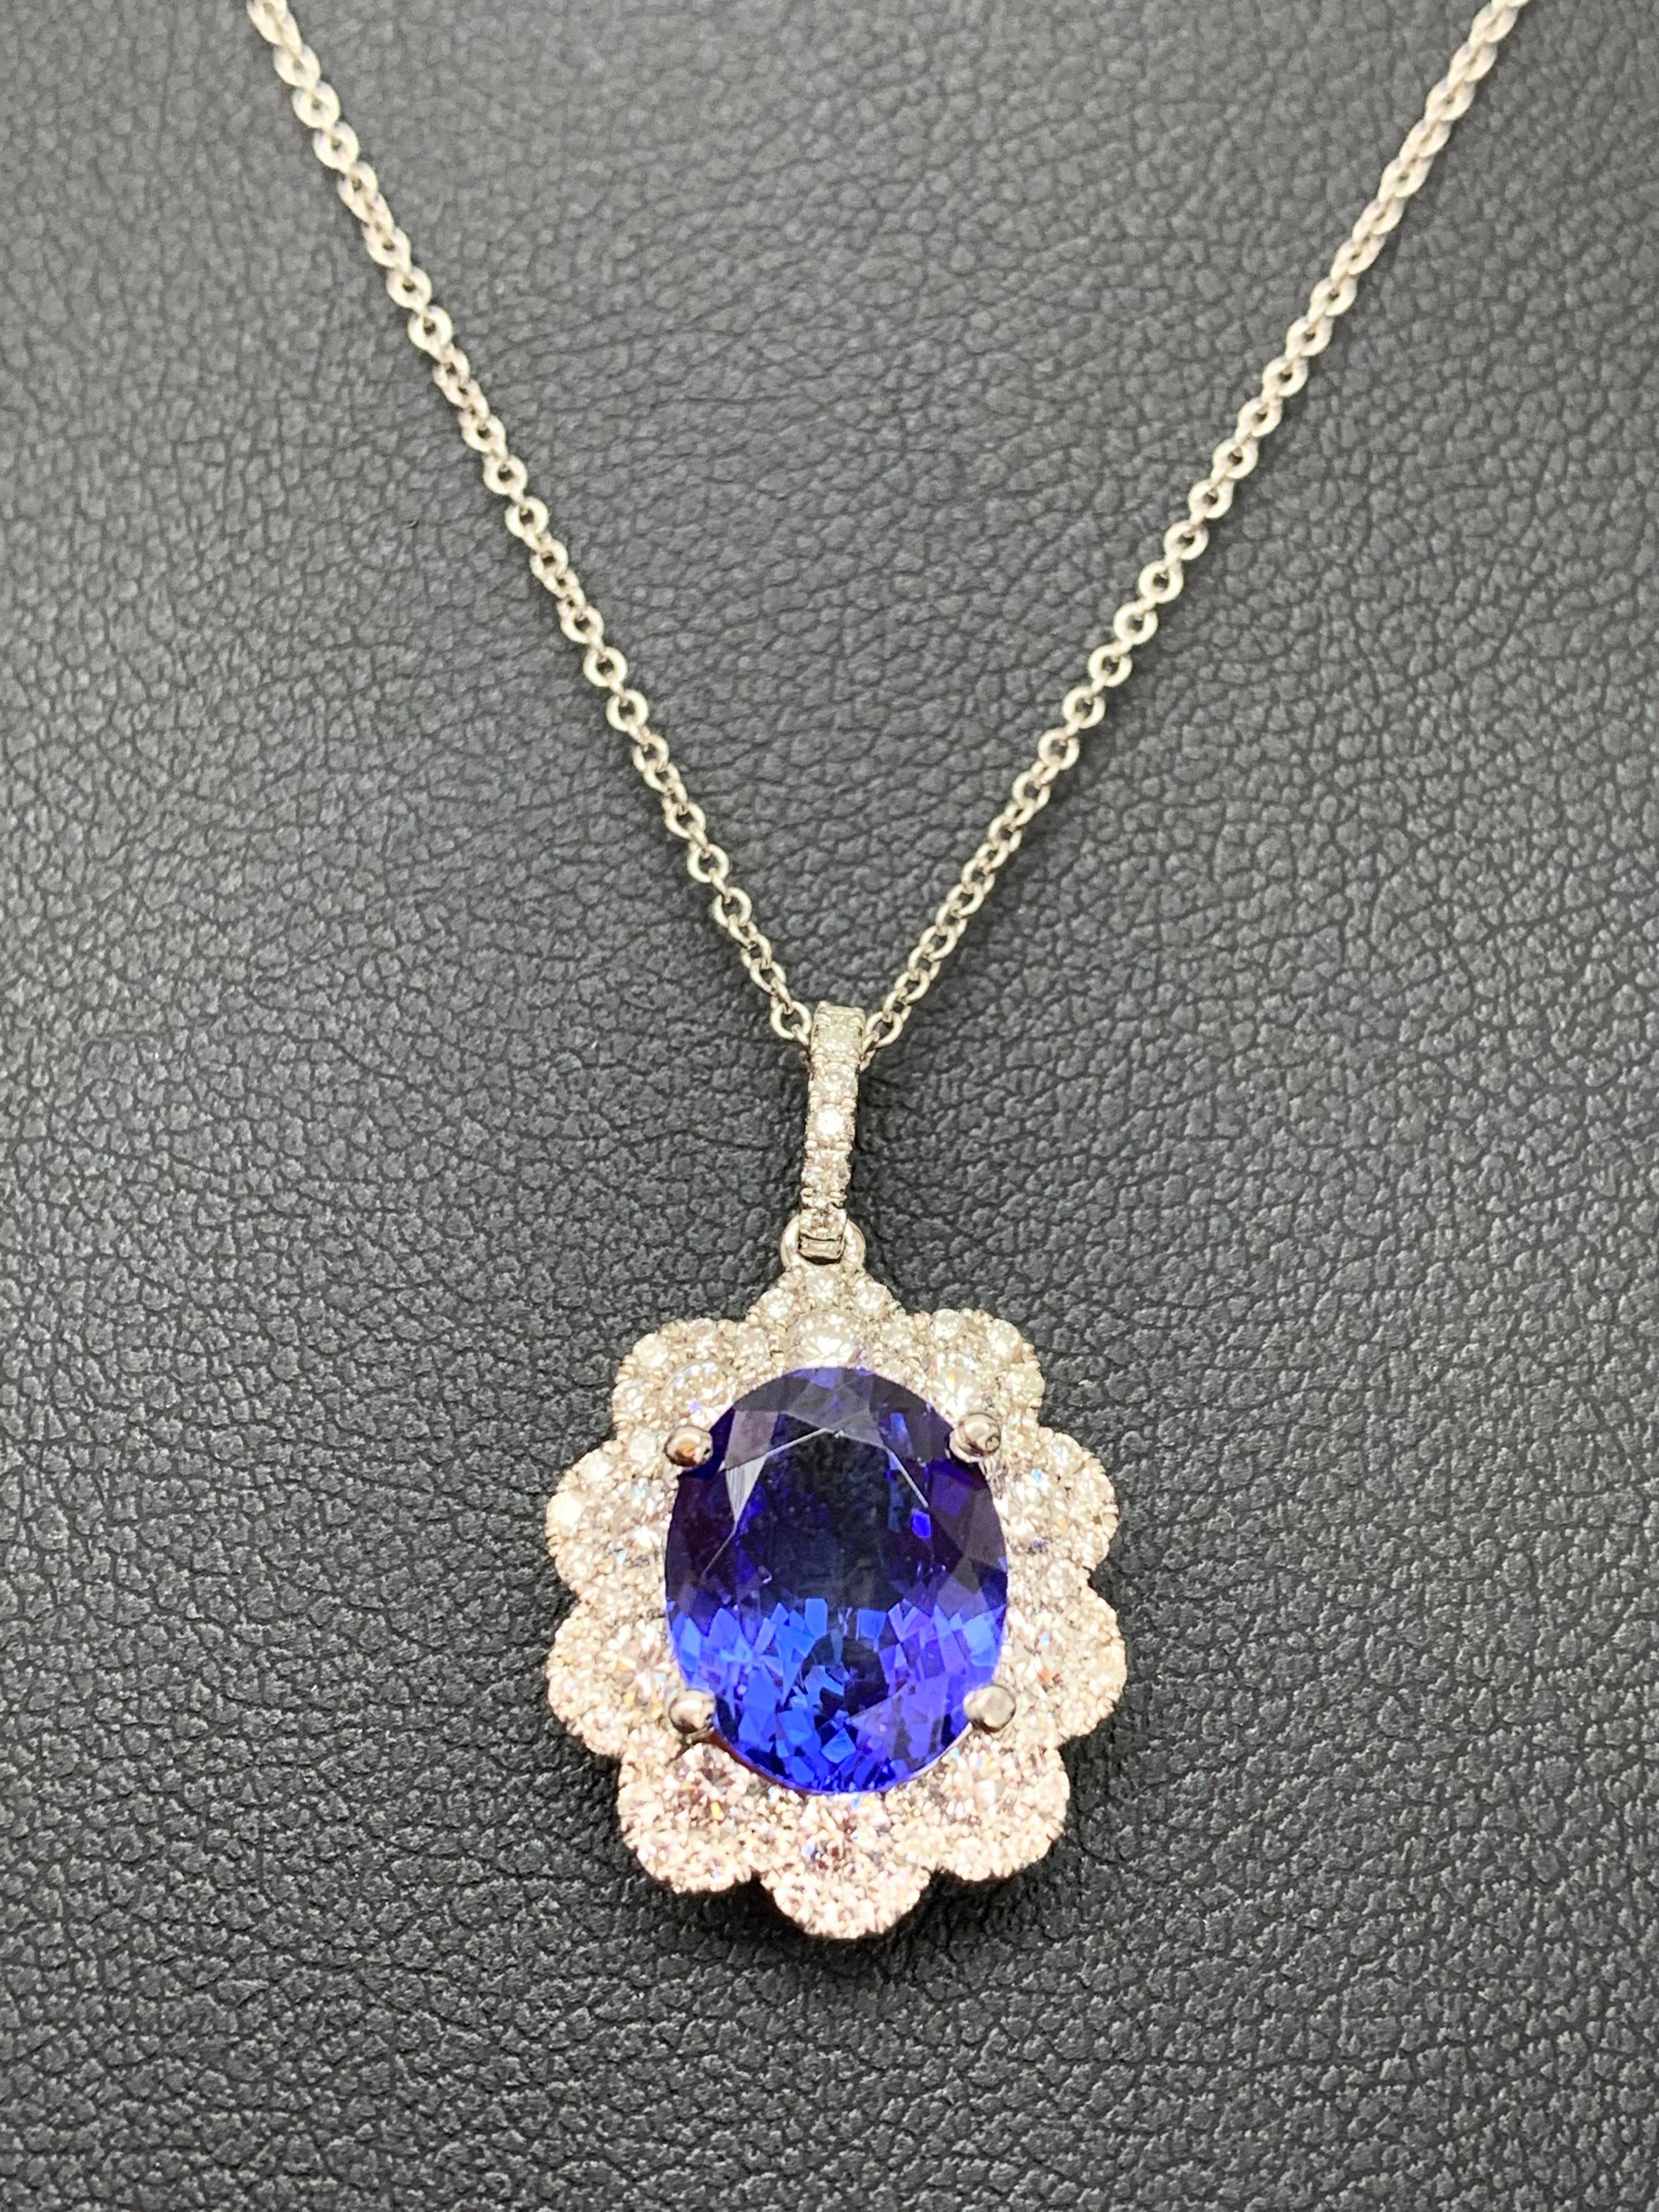 A simple floral motif pendant necklace showcasing a vibrant 5-carat oval cut tanzanite, surrounded by 
1.13 carats of 74 accent round diamonds. Made in 18 karats white gold.

Style available in different price ranges. Prices are based on your